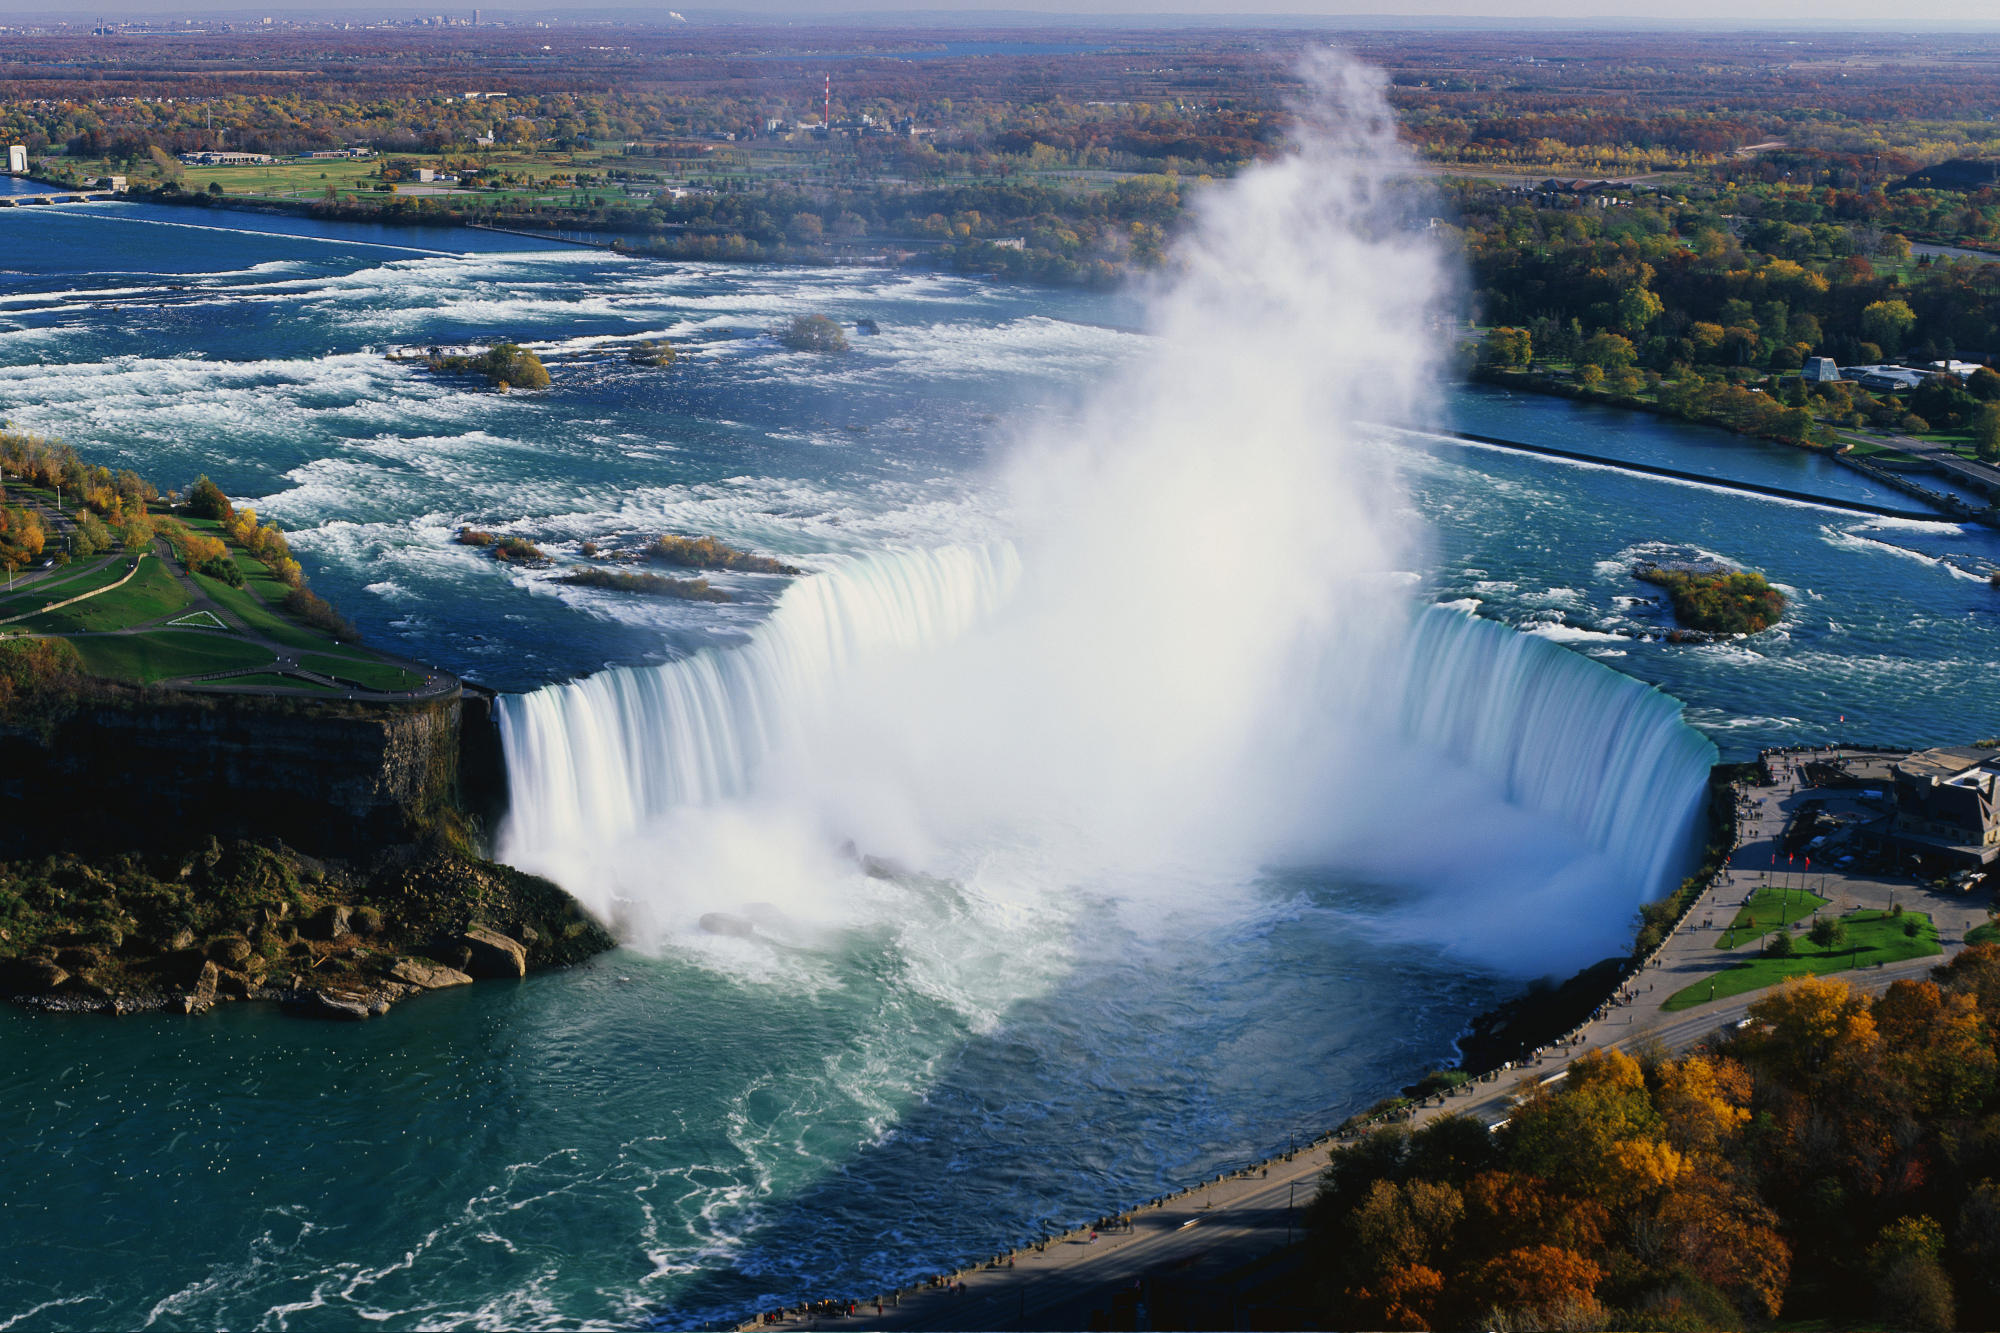 Scenic view of Niagara Falls surrounded by lush nature.